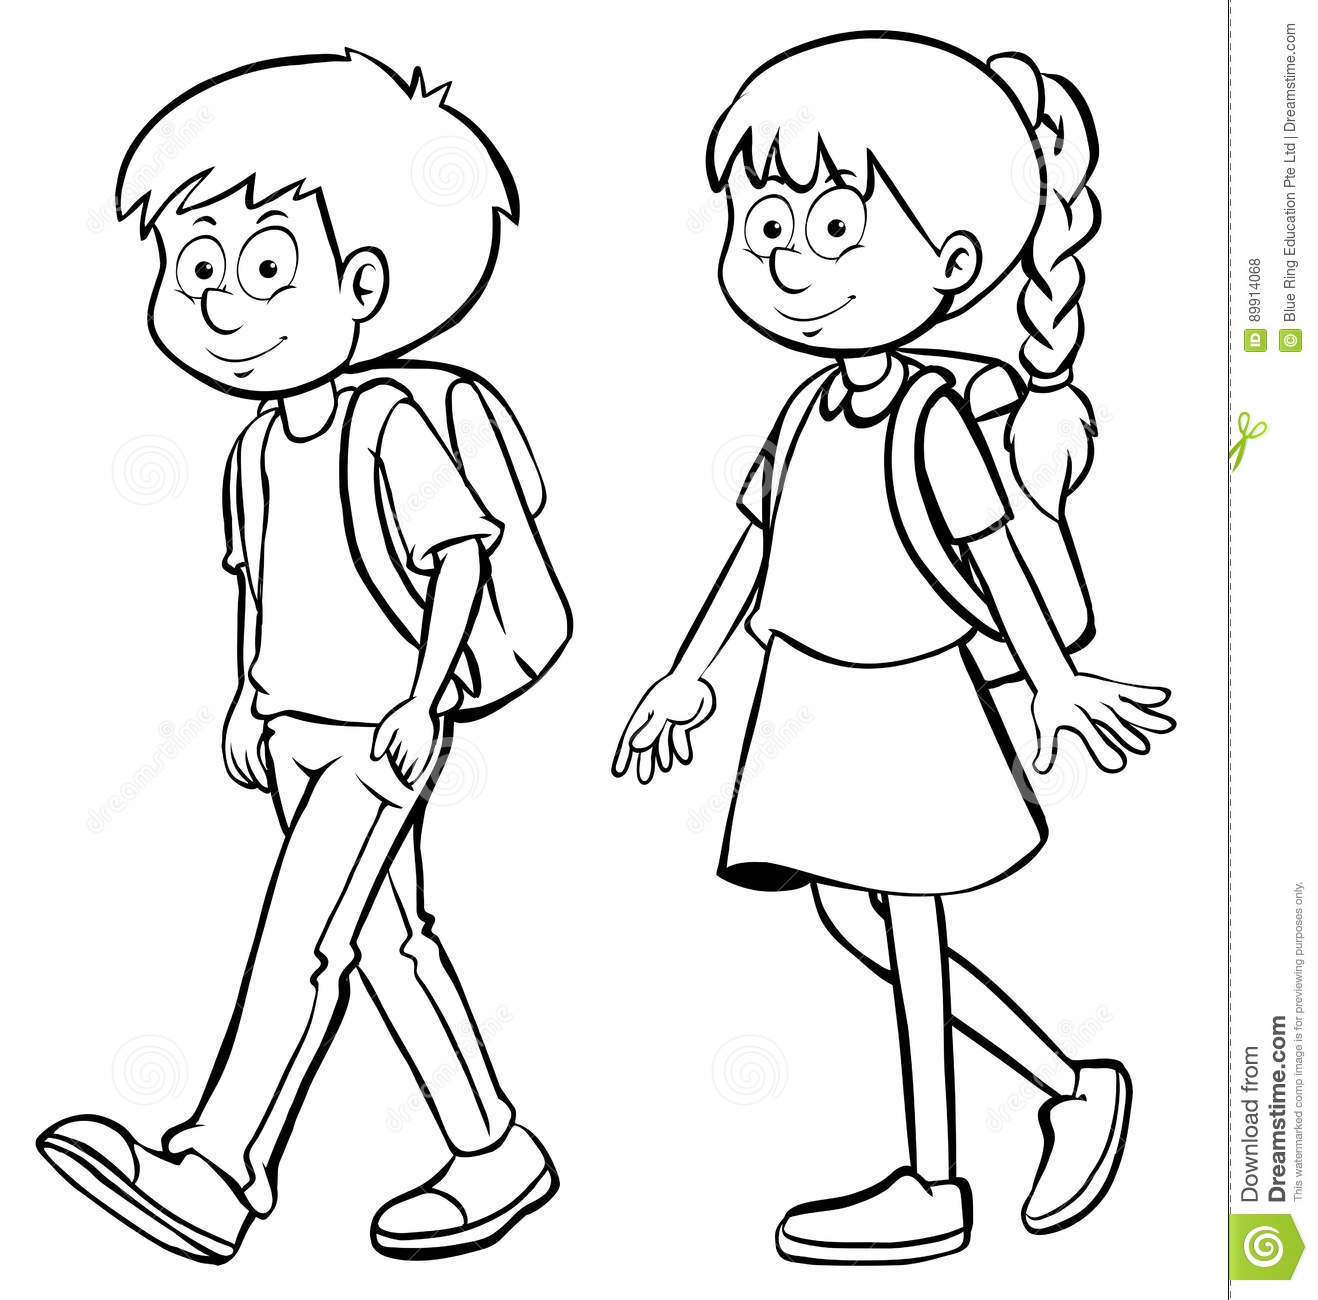 Coloring Pages For Boys And Girls
 Human Outline For Boy And Girl Stock Illustration